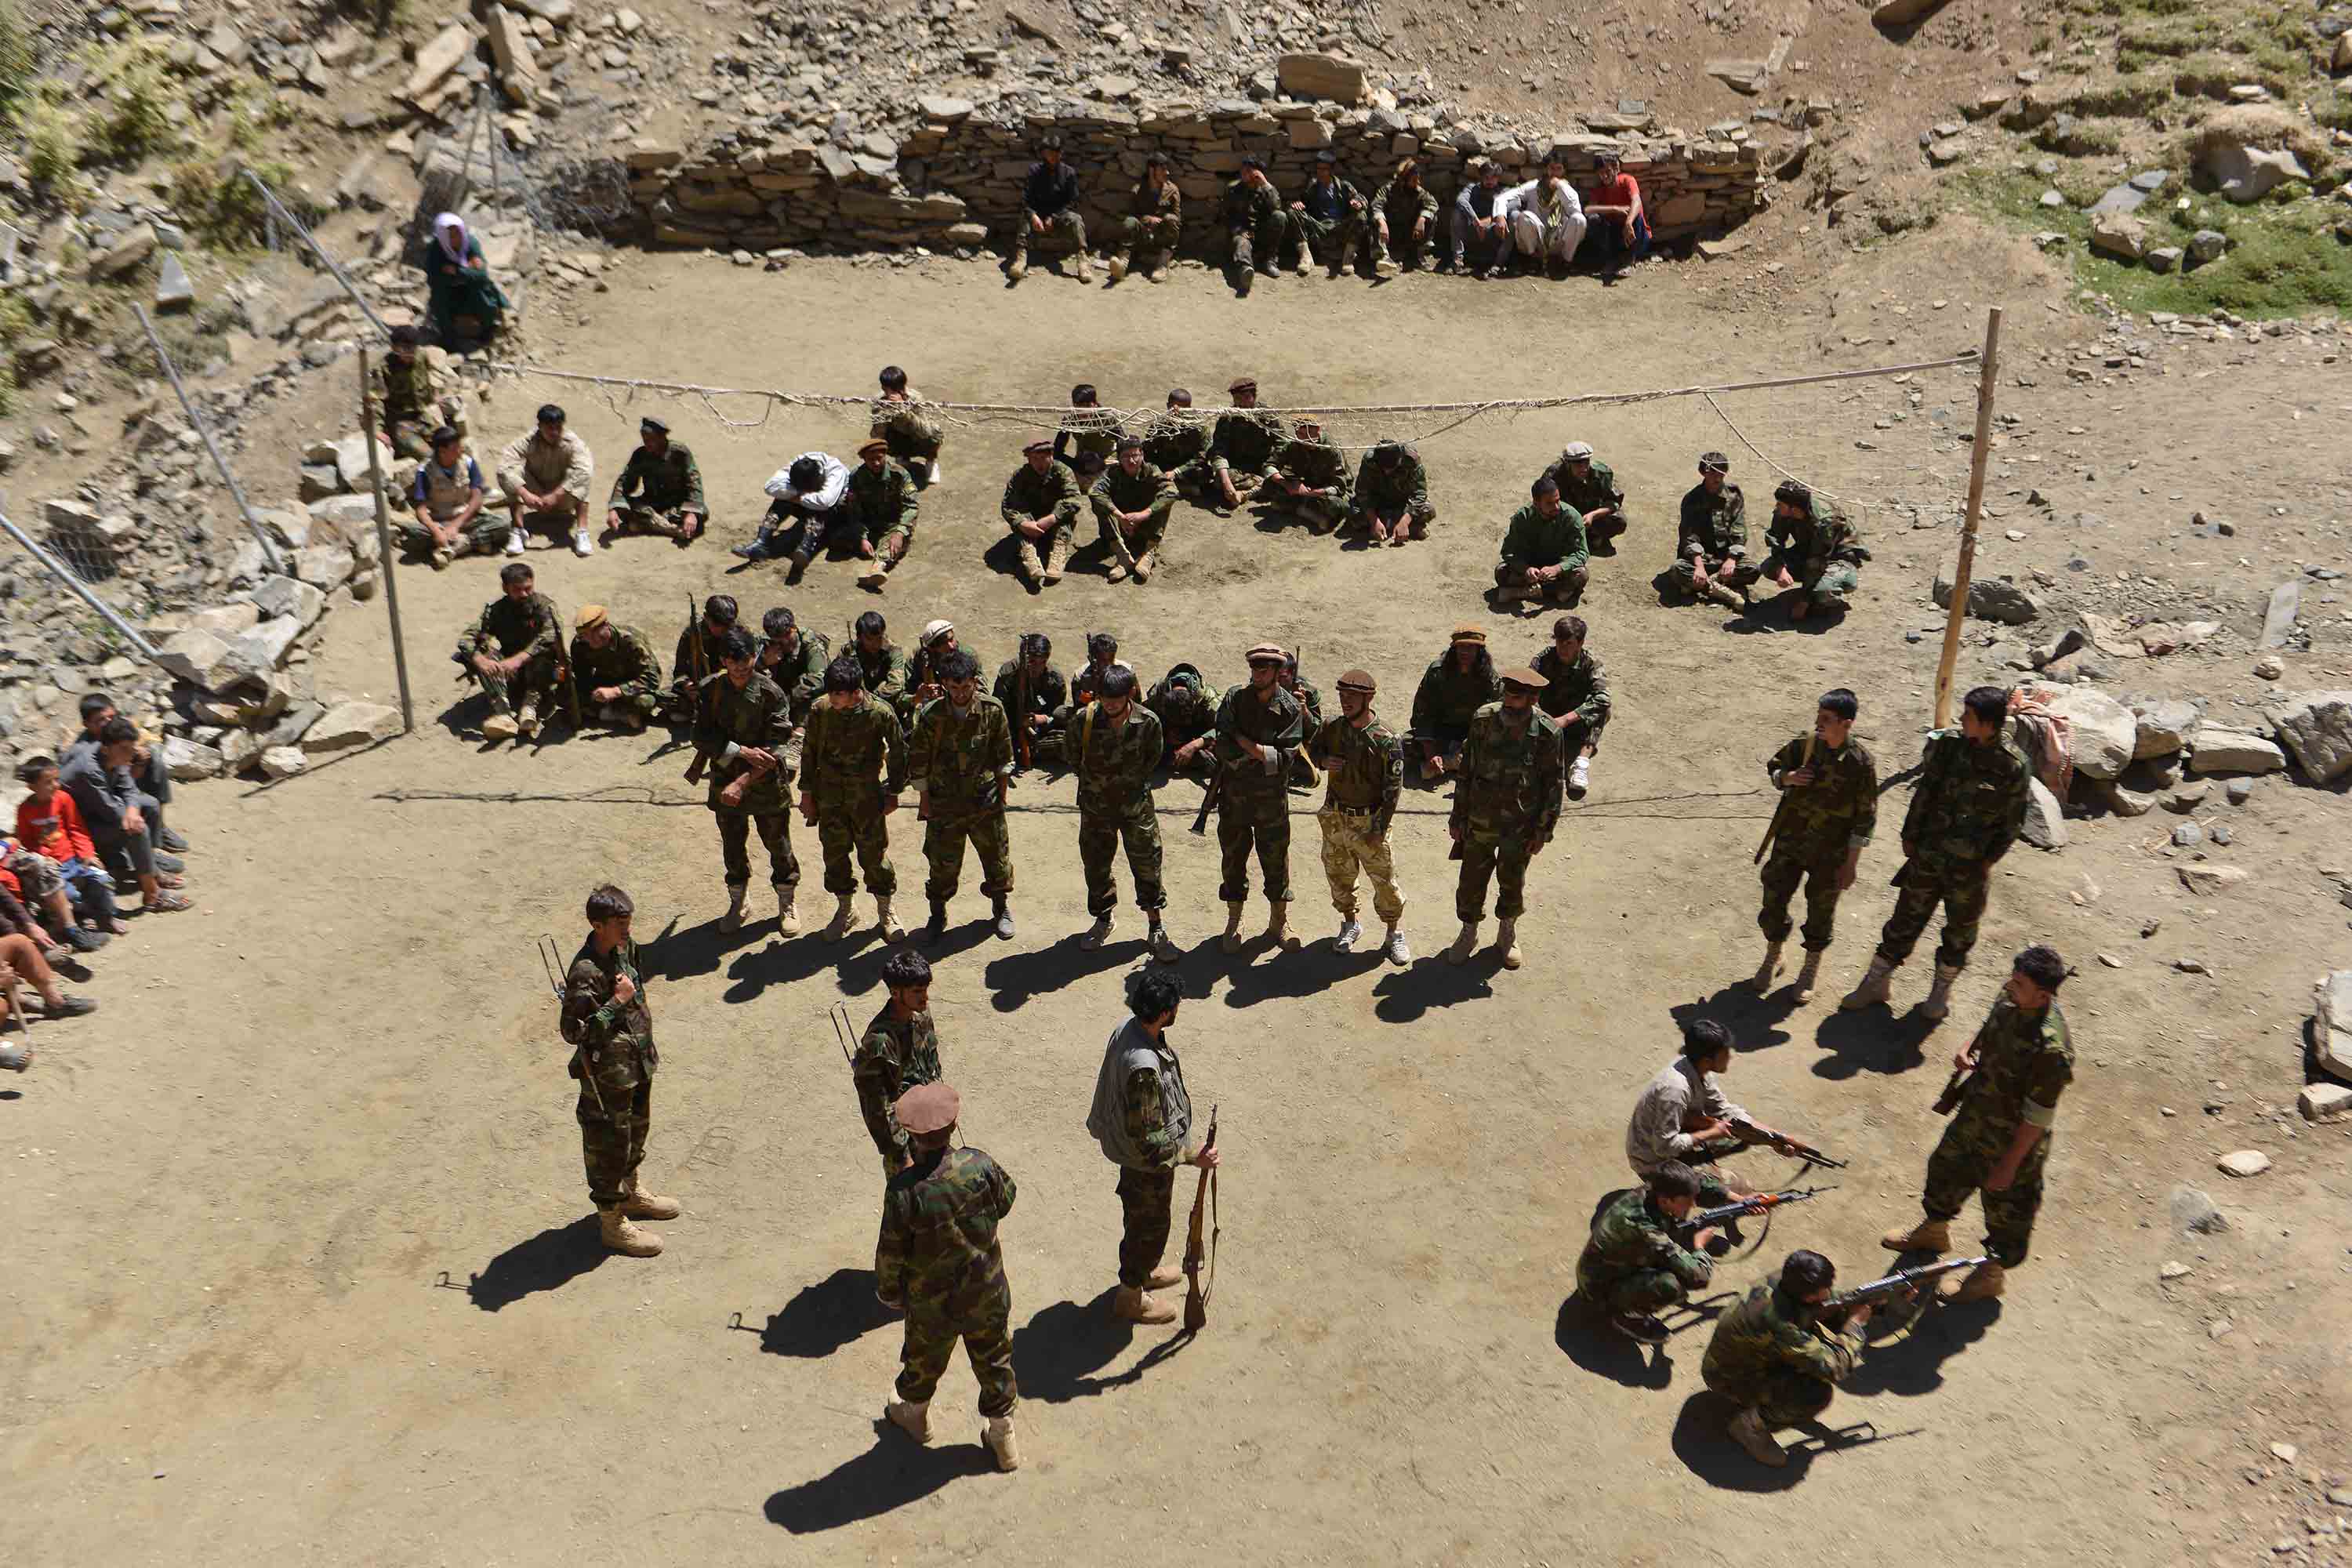 Afghan resistance movement forces take part in military training in Panjshir province, Afghanistan, on August 24.